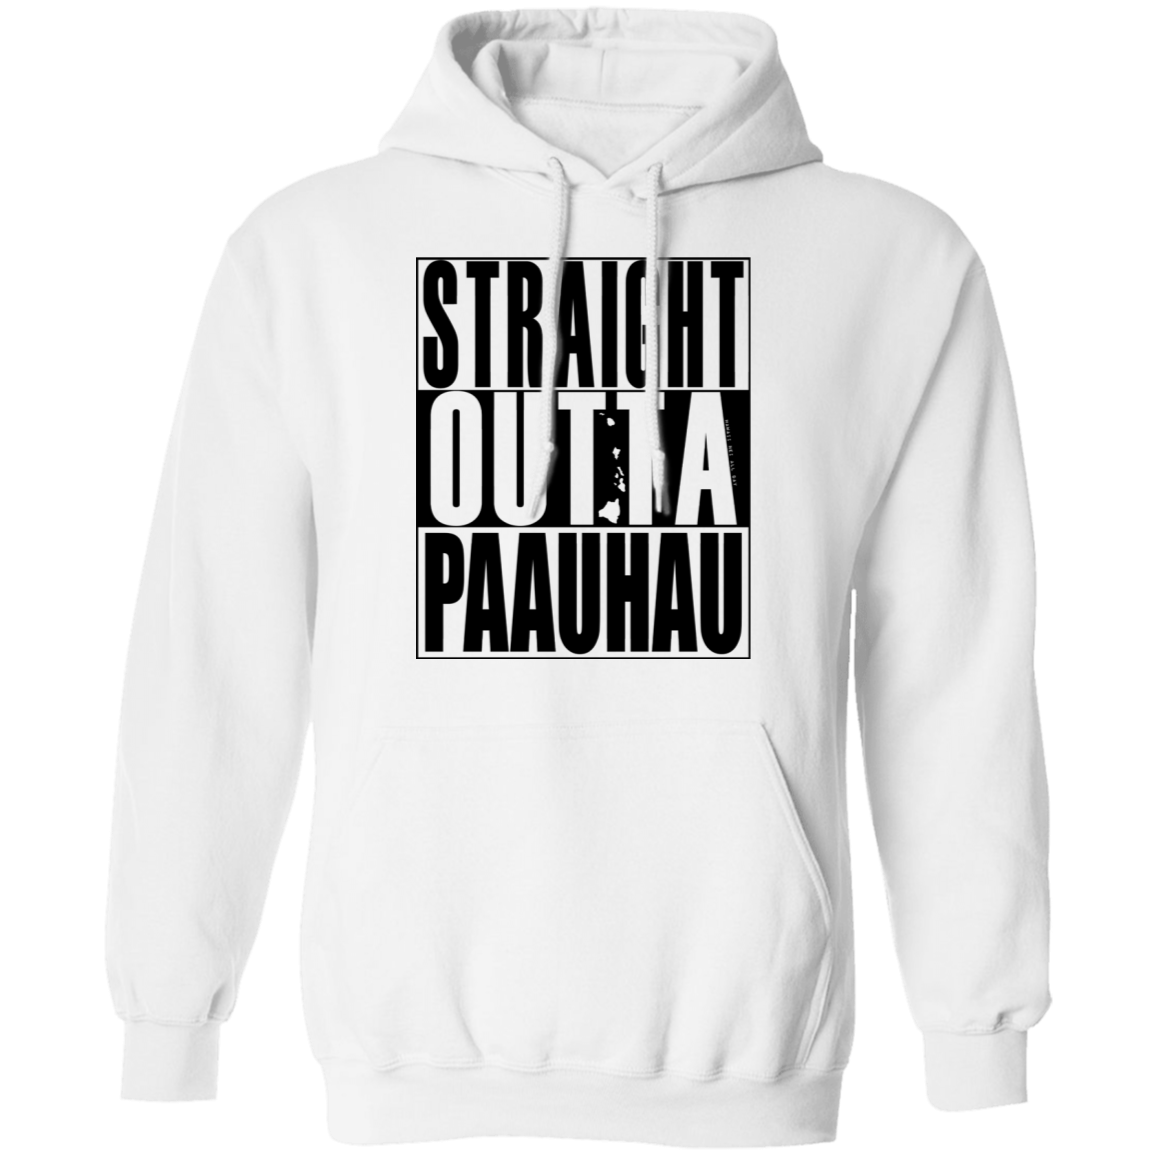 Straight Outta Paahau (black ink) Pullover Hoodie